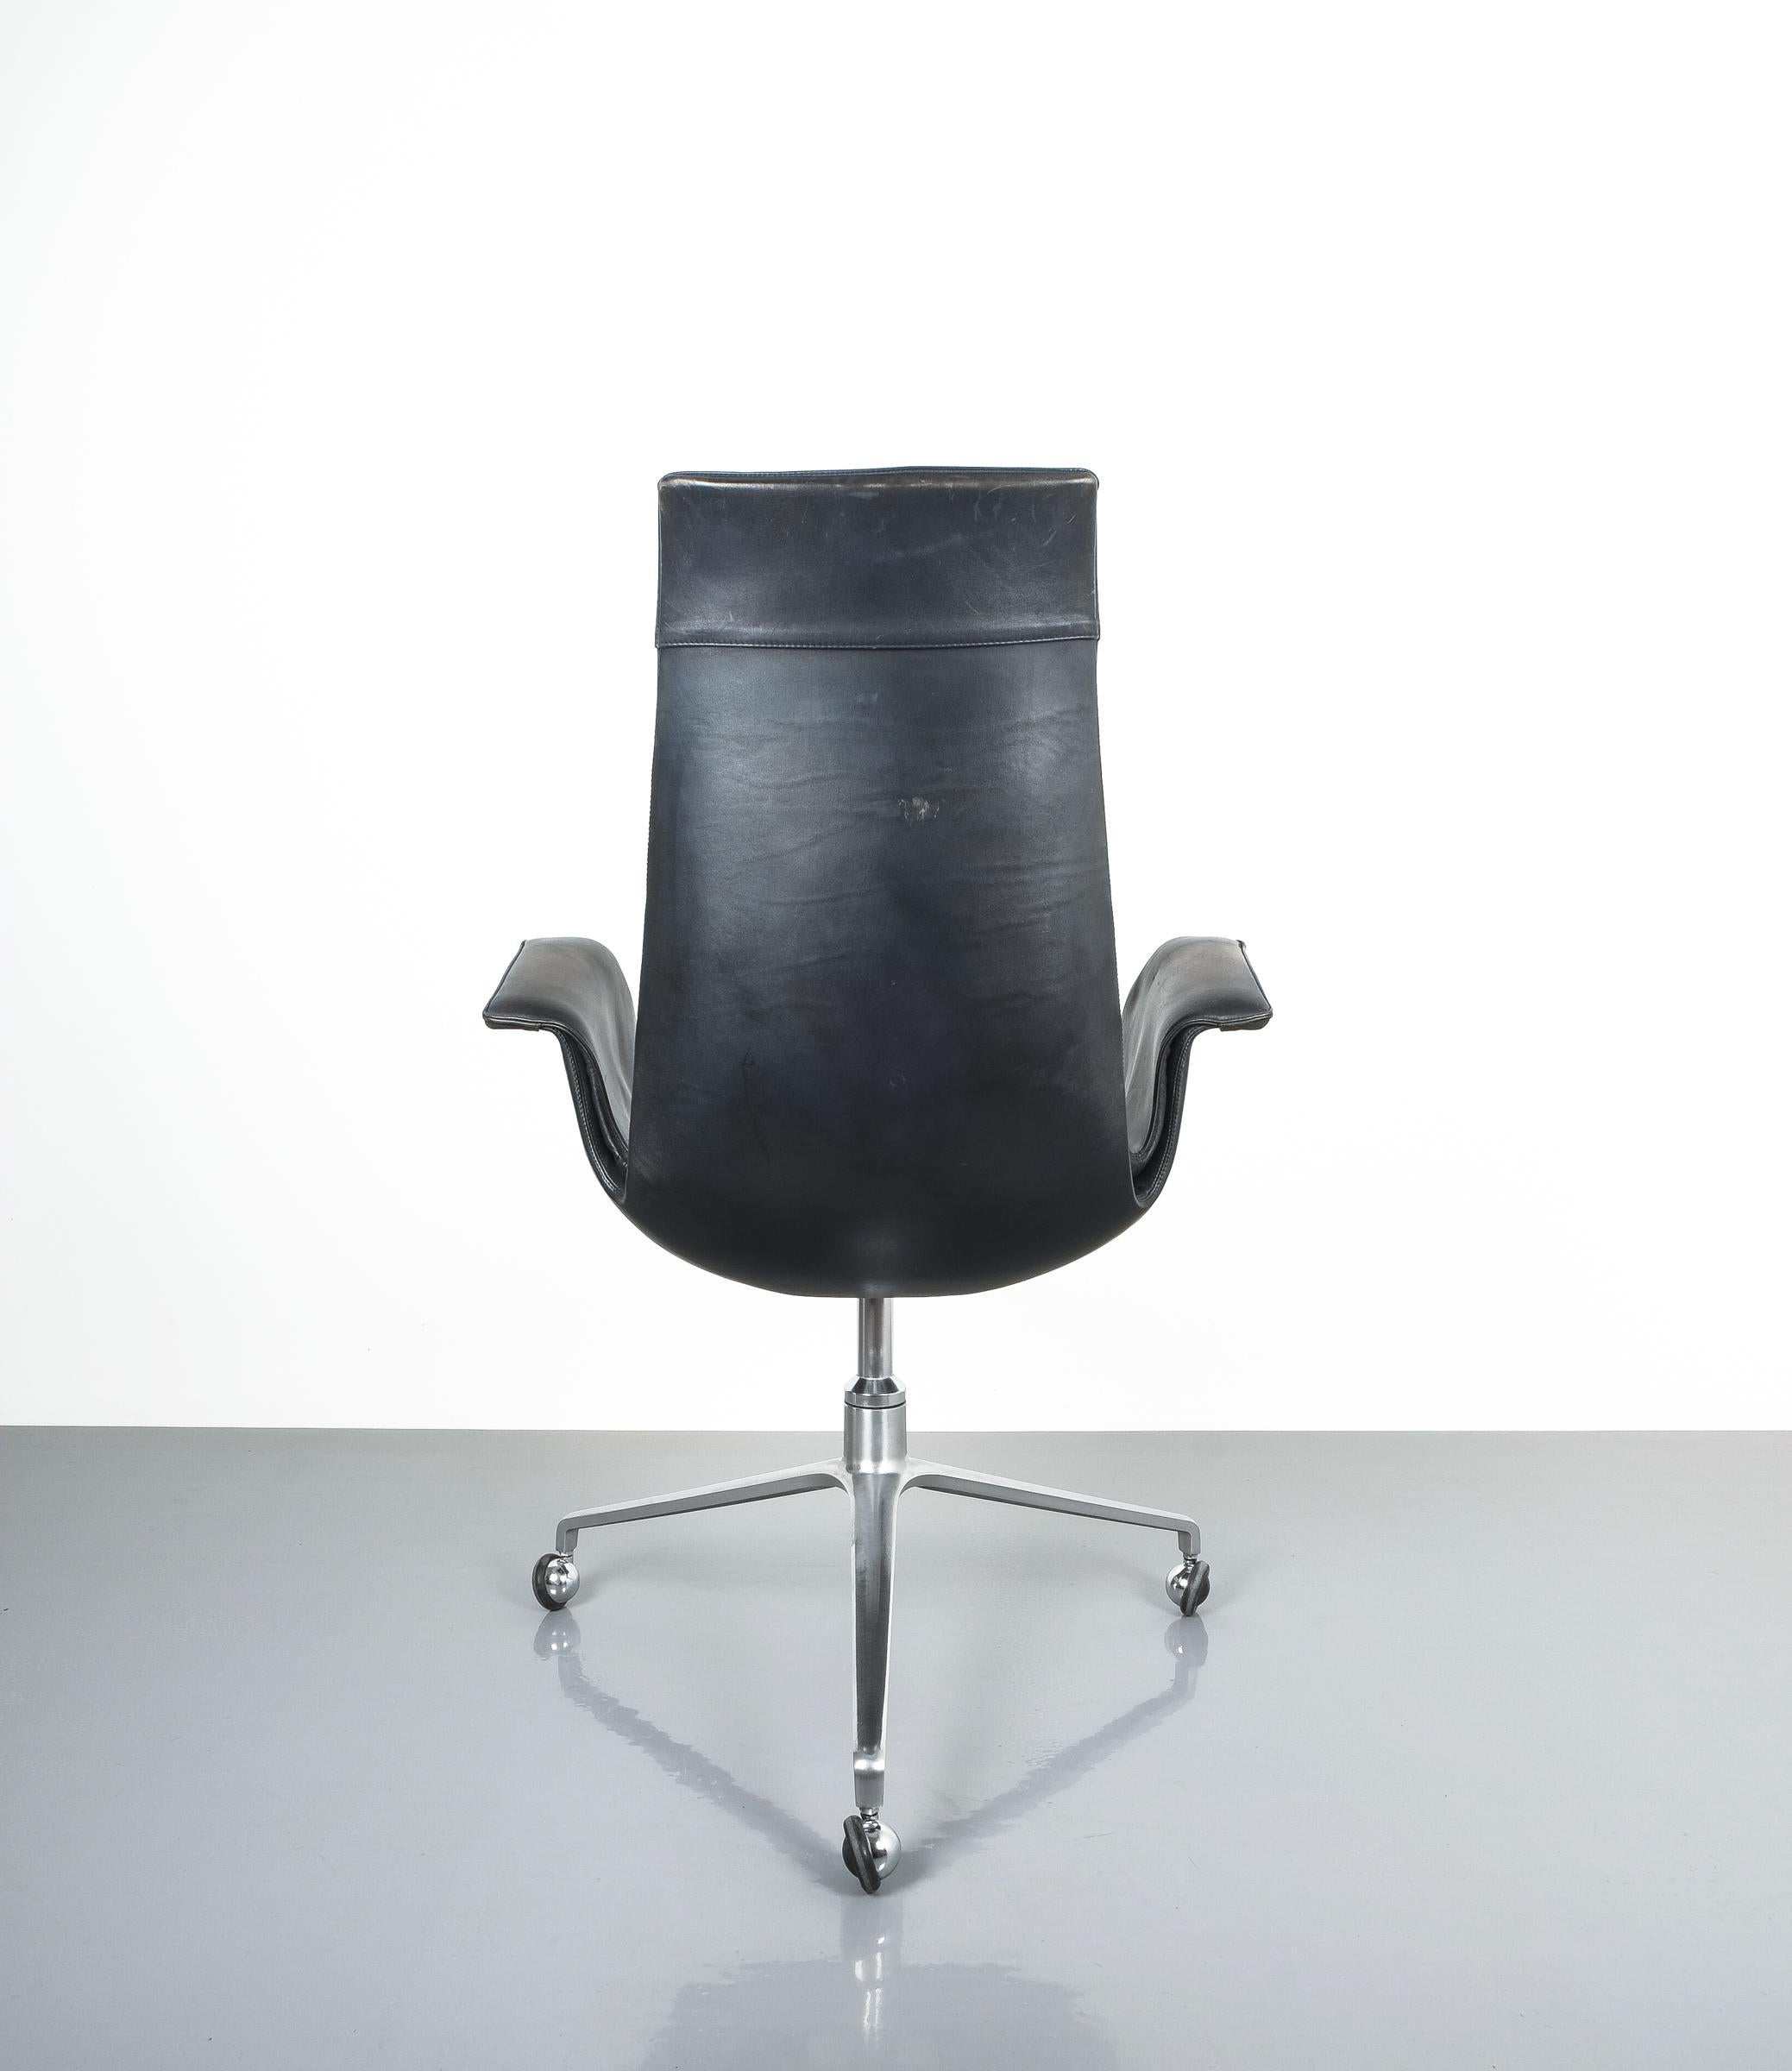 Dyed Dark Blue High Back Bird Desk Chair by Fabricius and Kastholm FK 6725, 1964